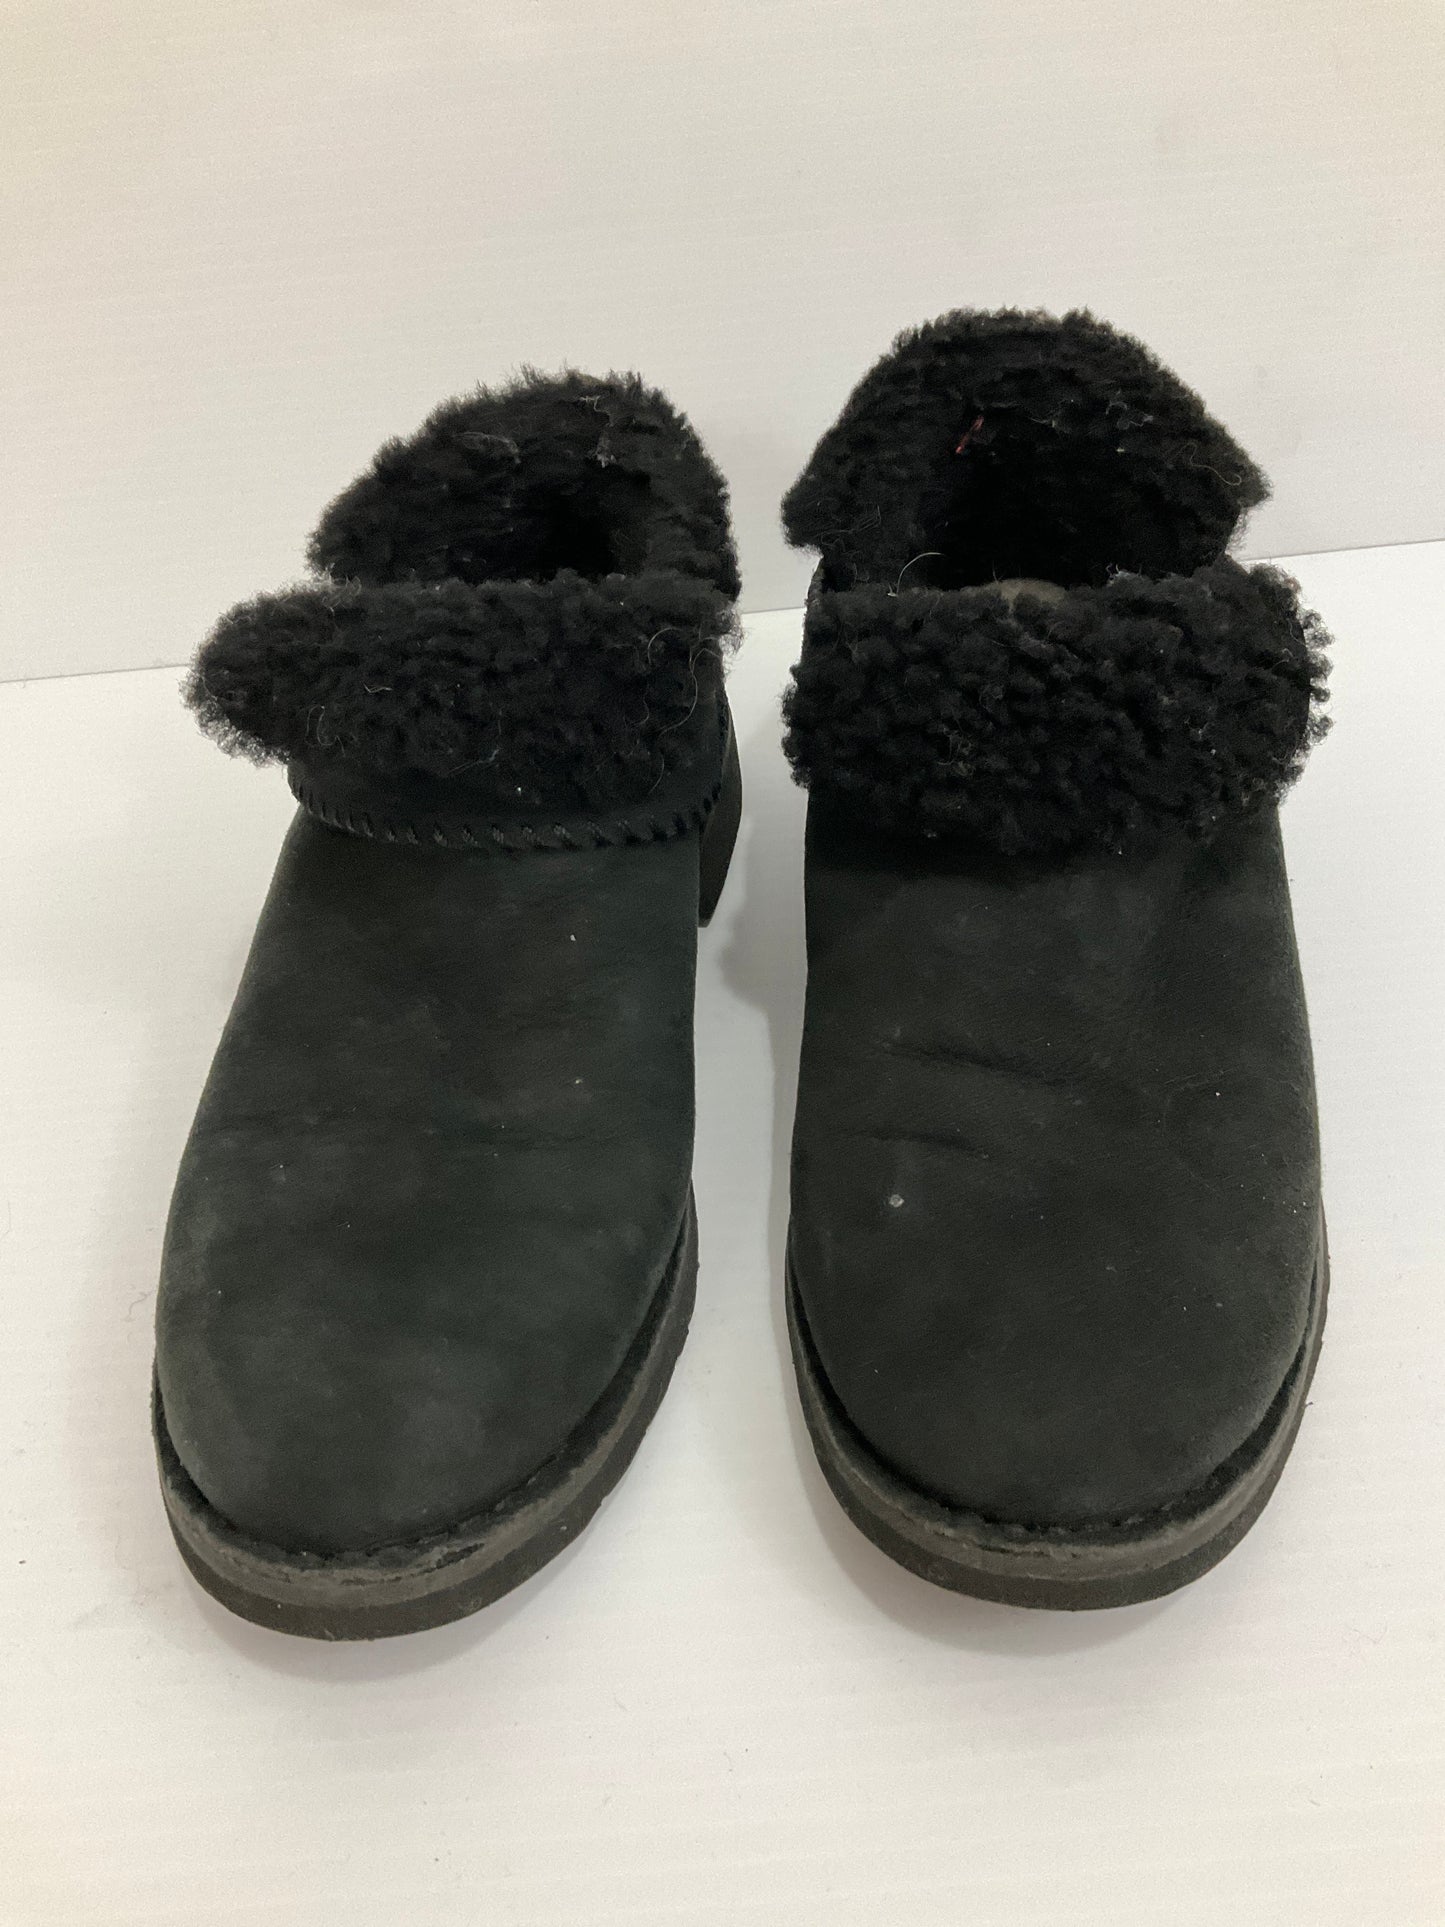 Boots Ankle Flats By Ugg  Size: 8.5